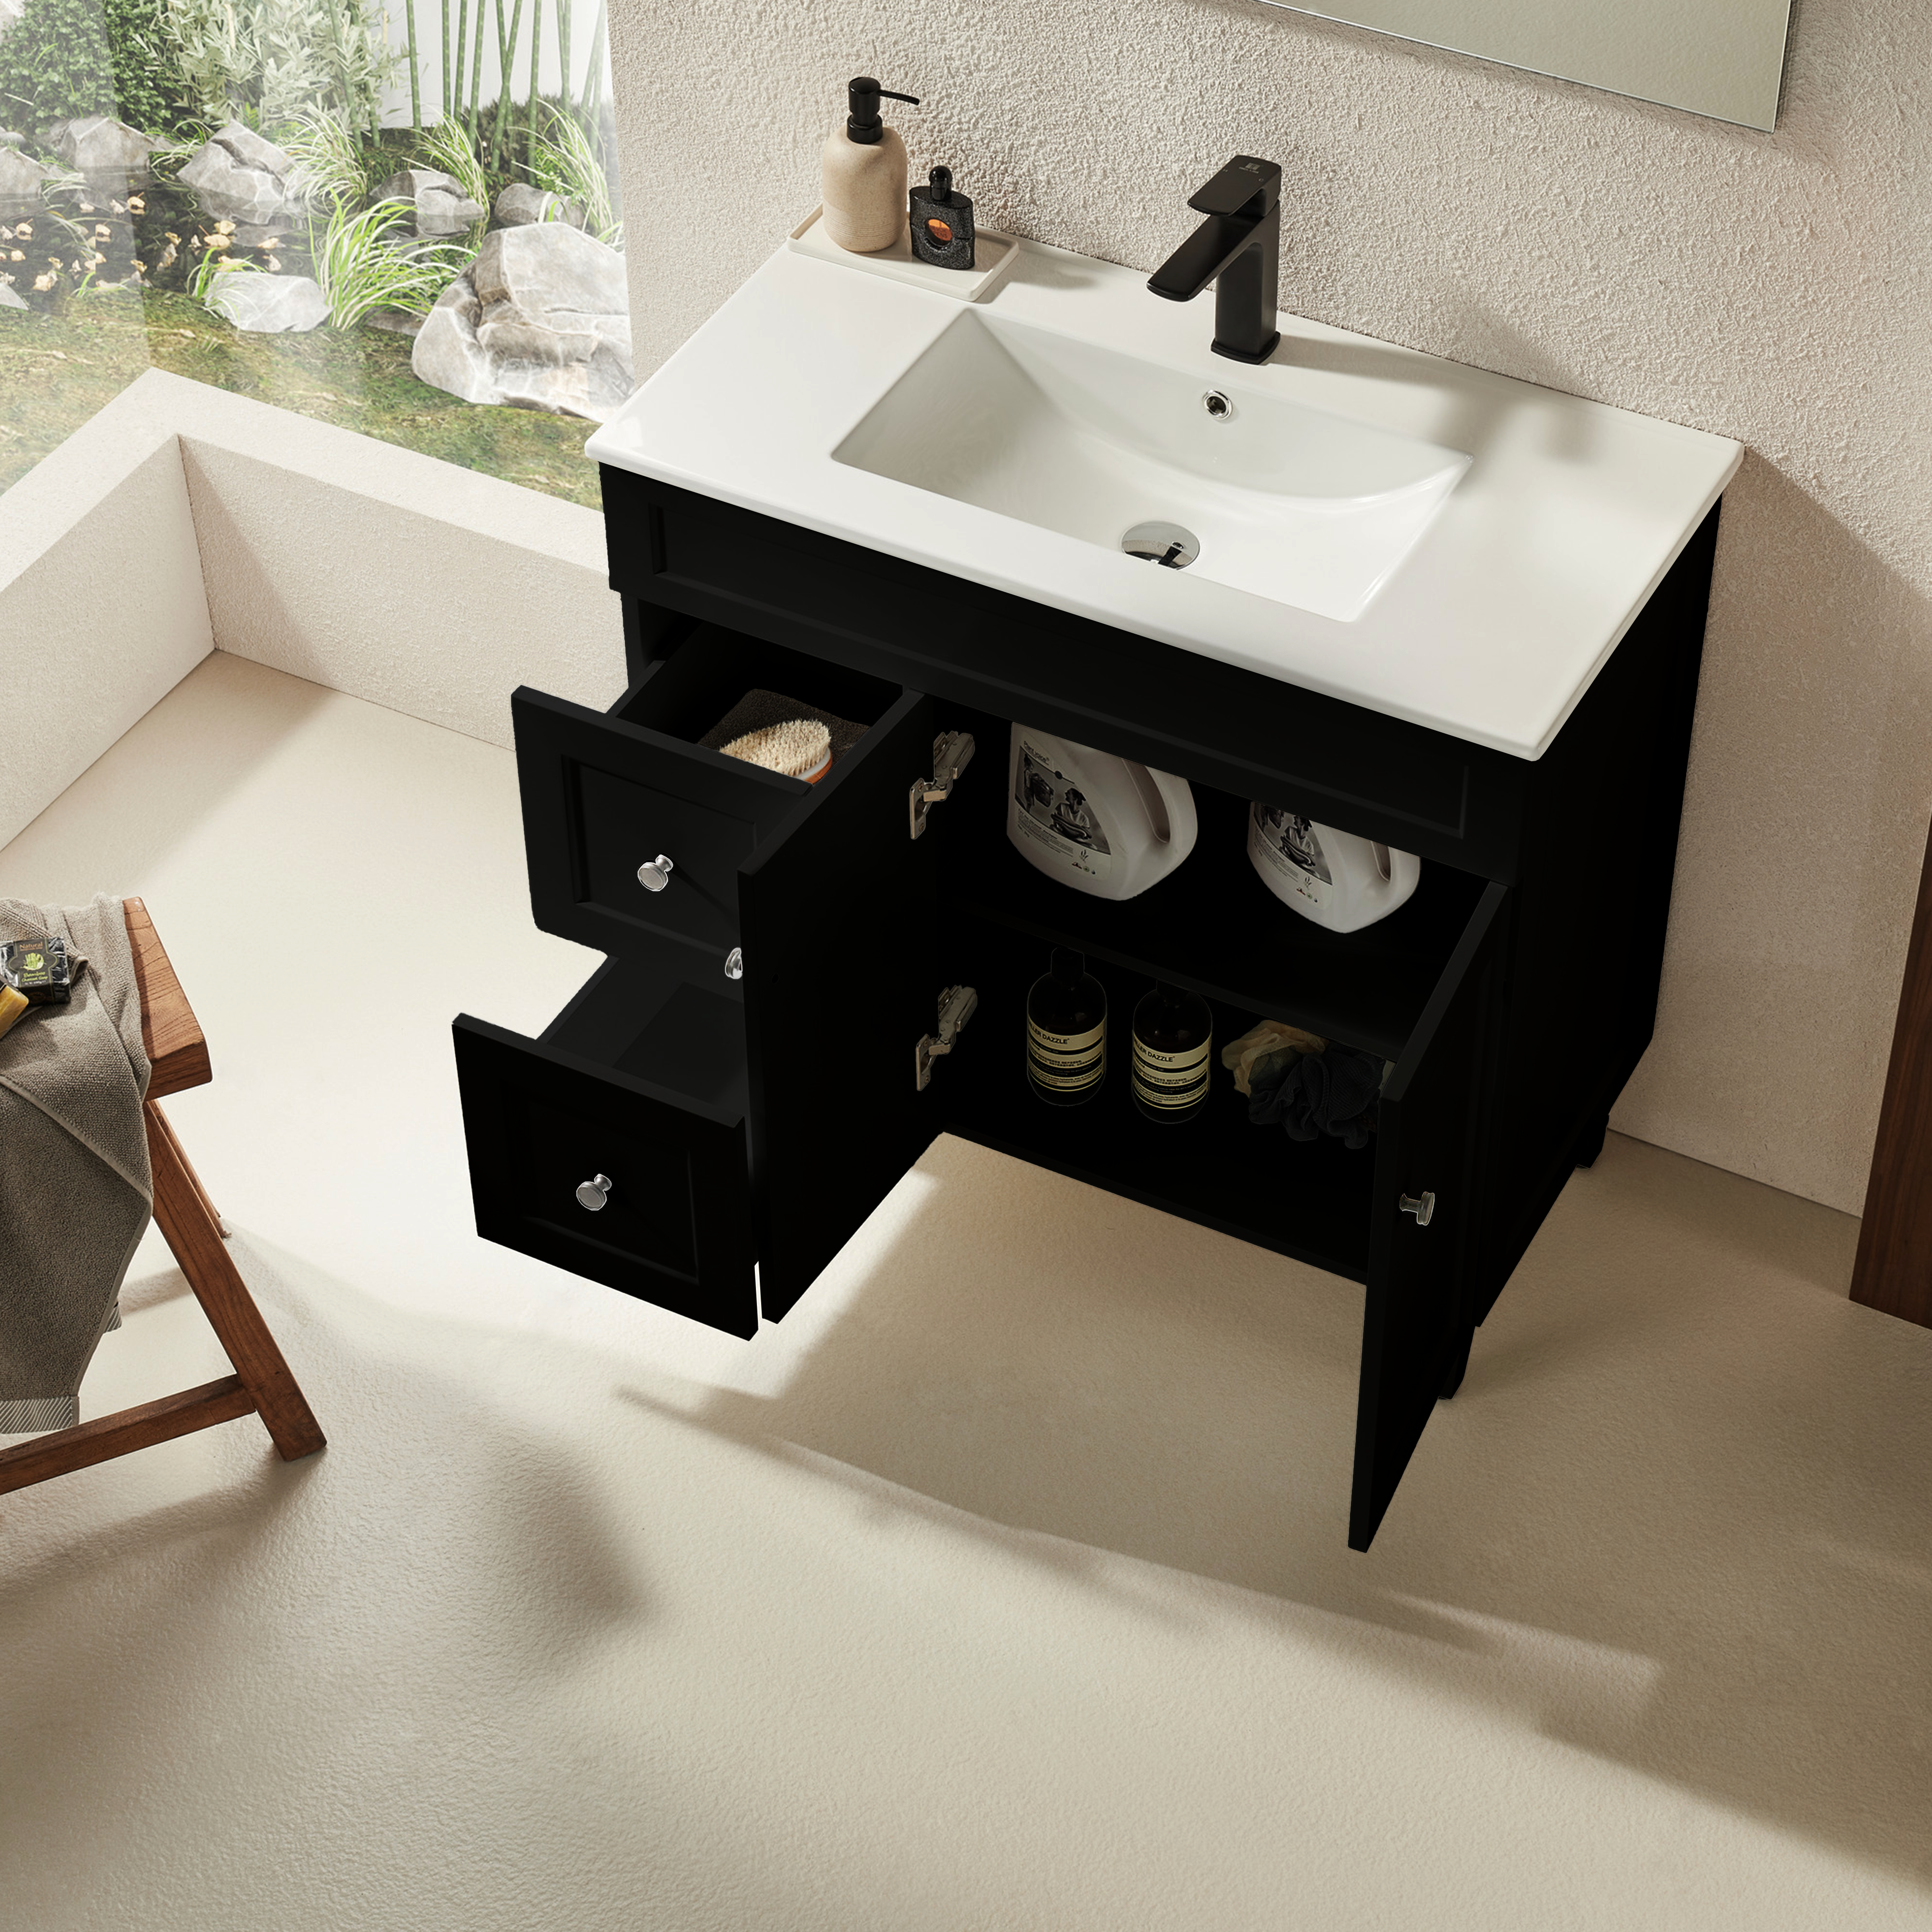 CETO HARRINGTON MATTE BLACK 900MM SINGLE BOWL FLOOR STANDING VANITY (AVAILABLE IN LEFT AND RIGHT HAND DRAWER)